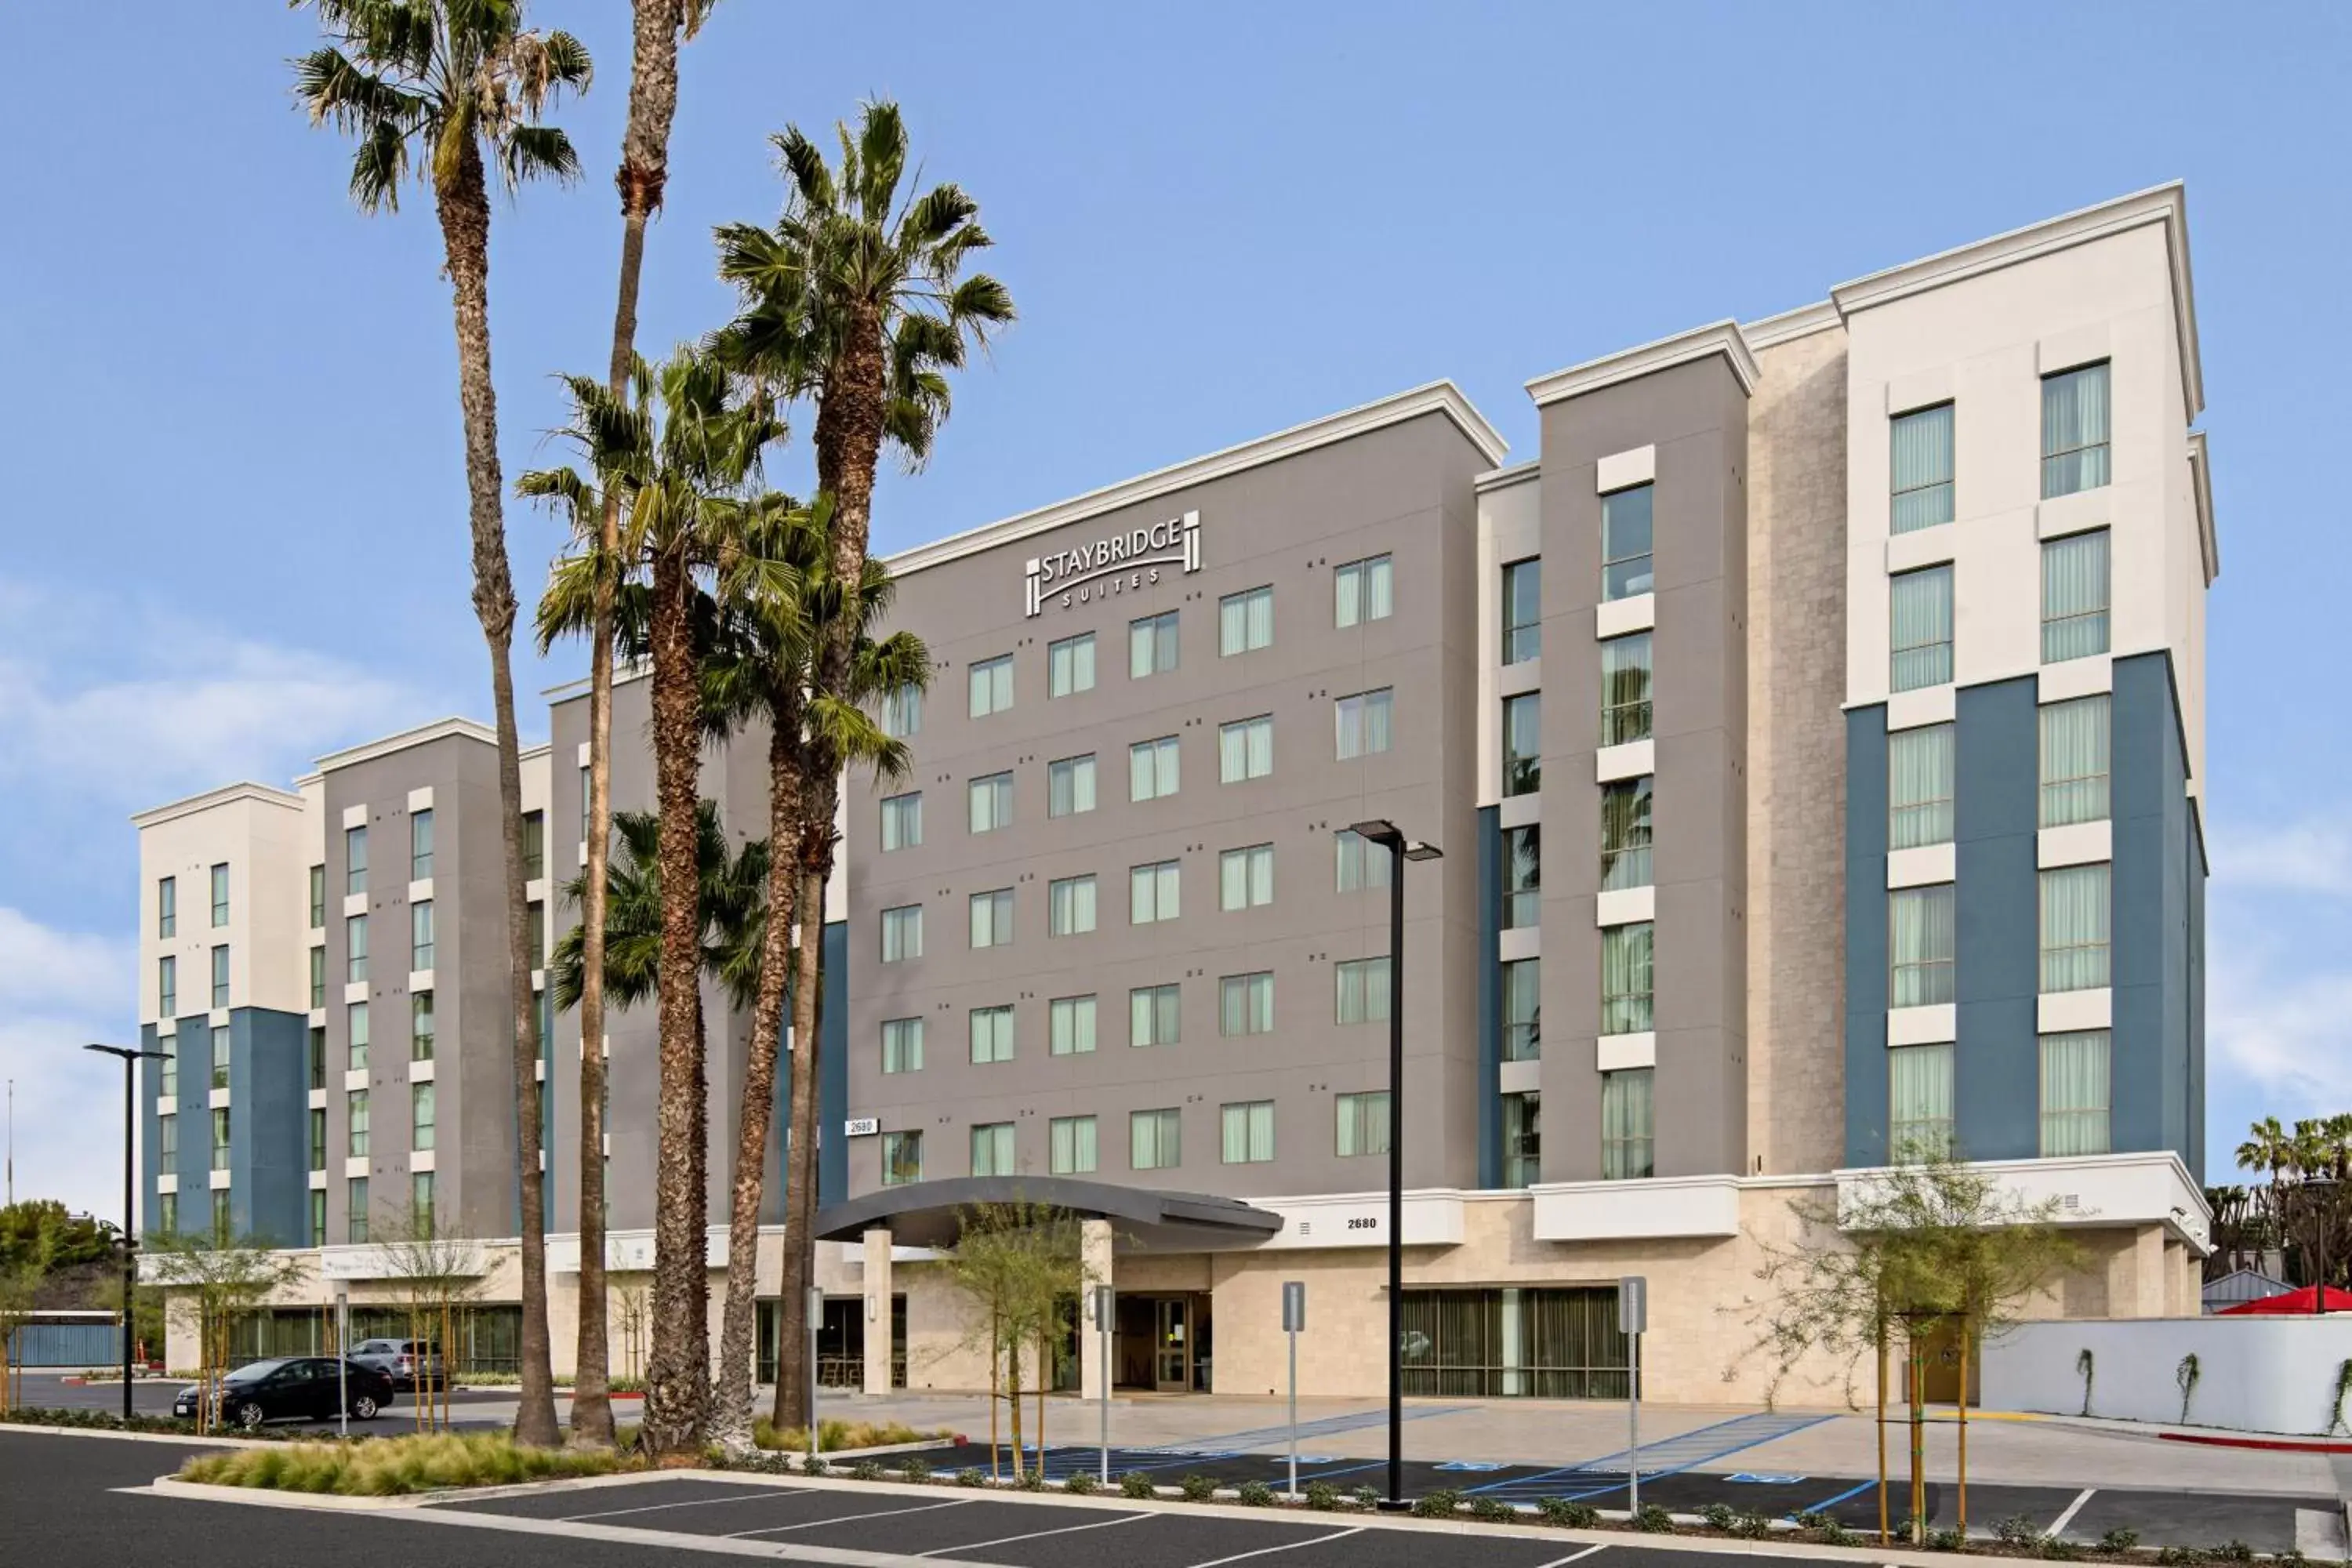 Property Building in Staybridge Suites - Long Beach Airport, an IHG Hotel